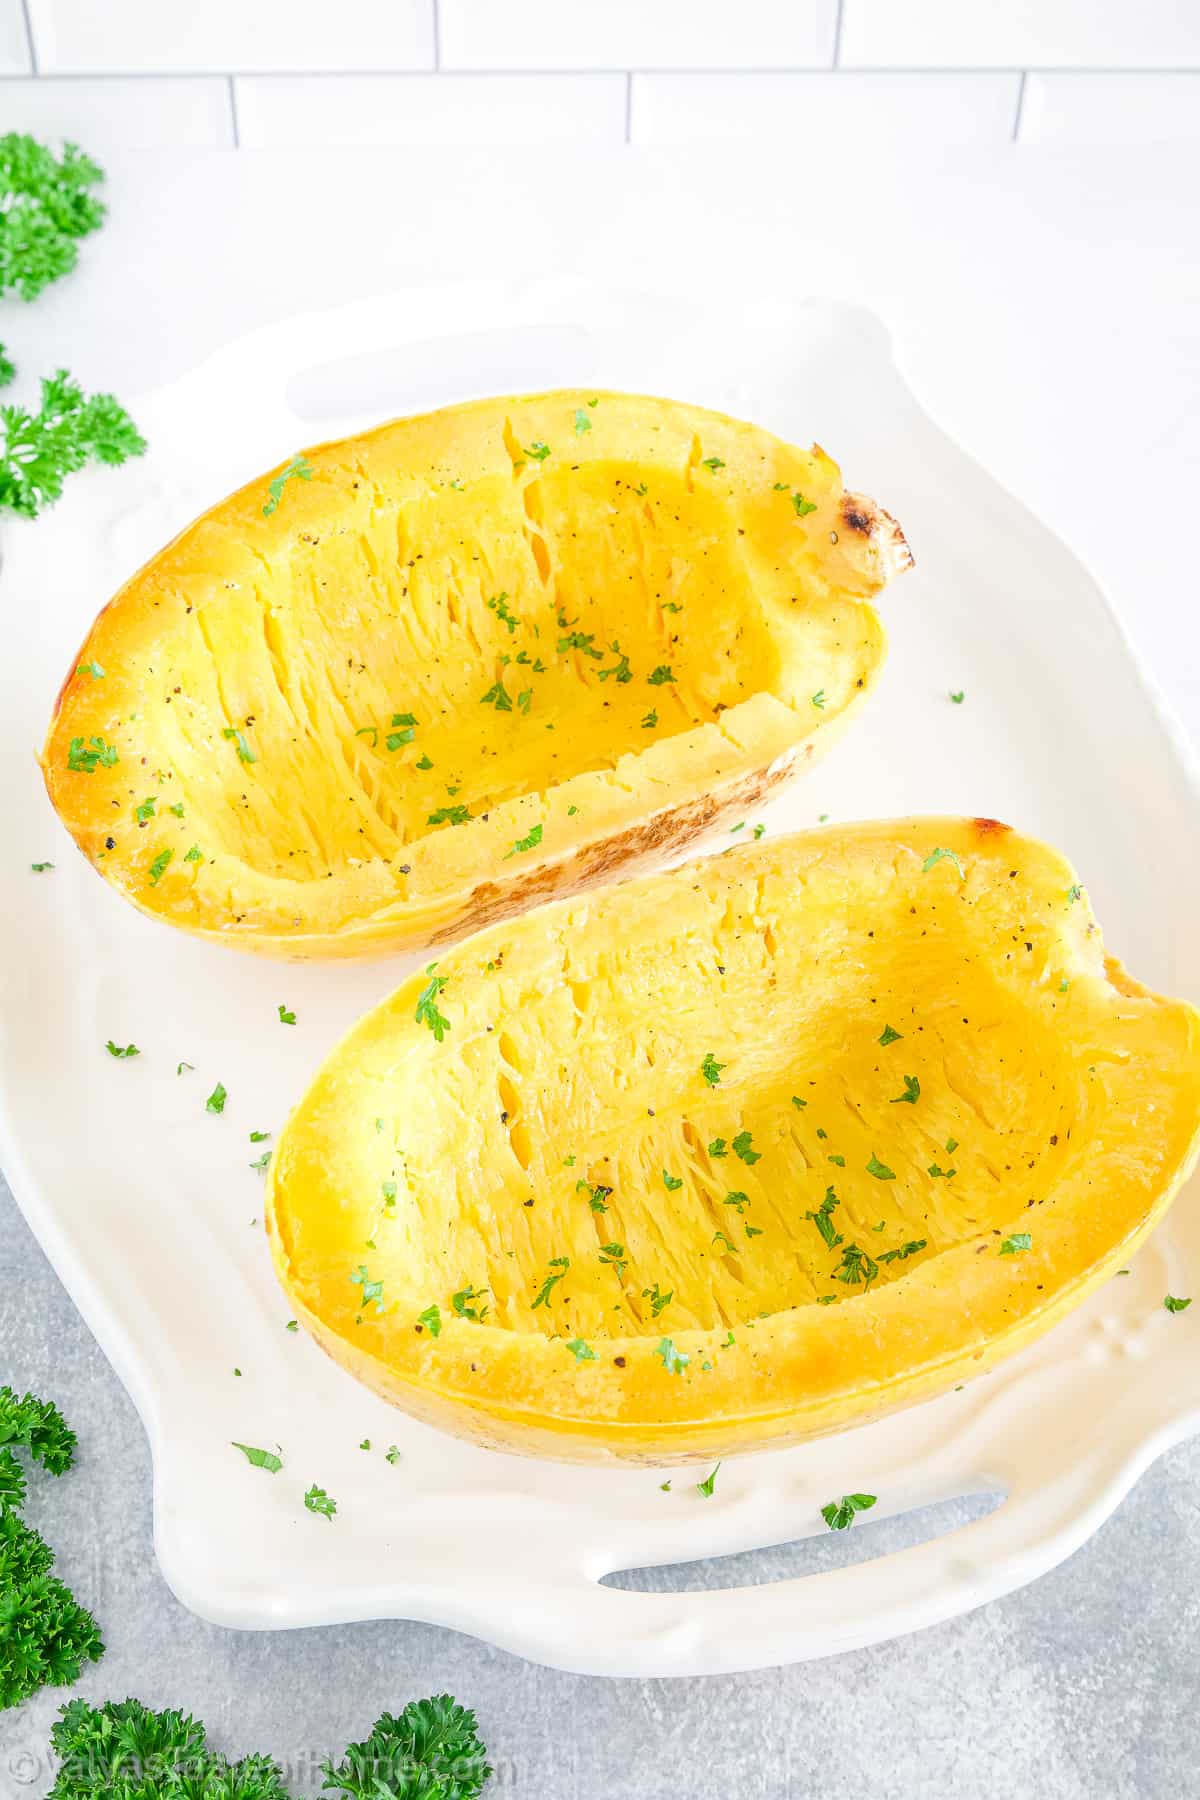 Whether as a side dish or a healthier alternative to pasta, enjoy the versatility and health benefits of spaghetti squash, such as its high beta-carotene and antioxidant content.